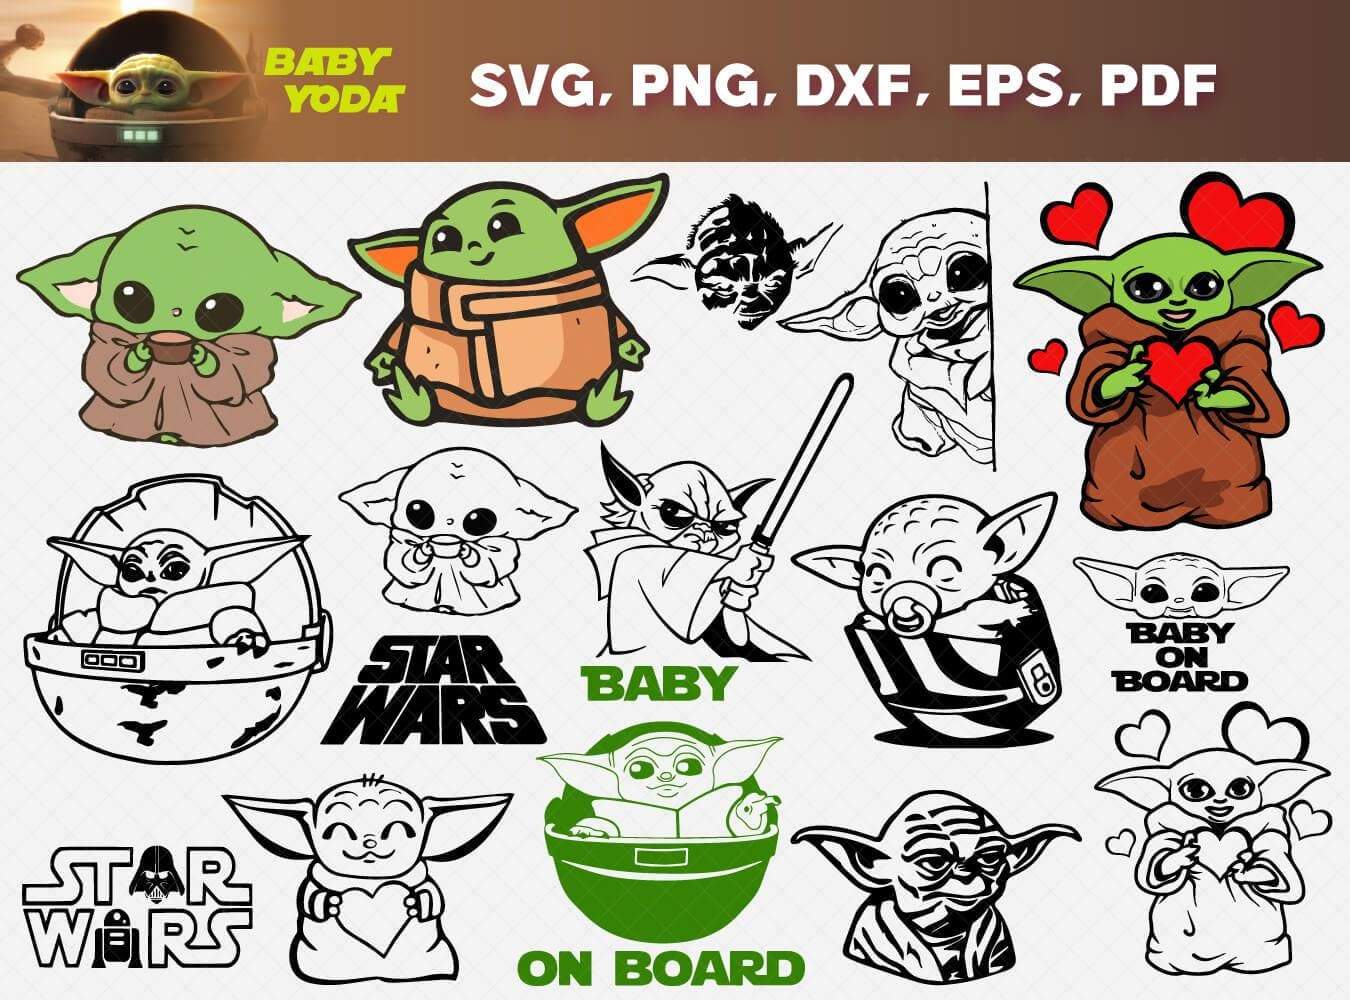 Download Baby Yoda SVG Bundle. Includes cuttable and printable high quality Bab - Honey SVG